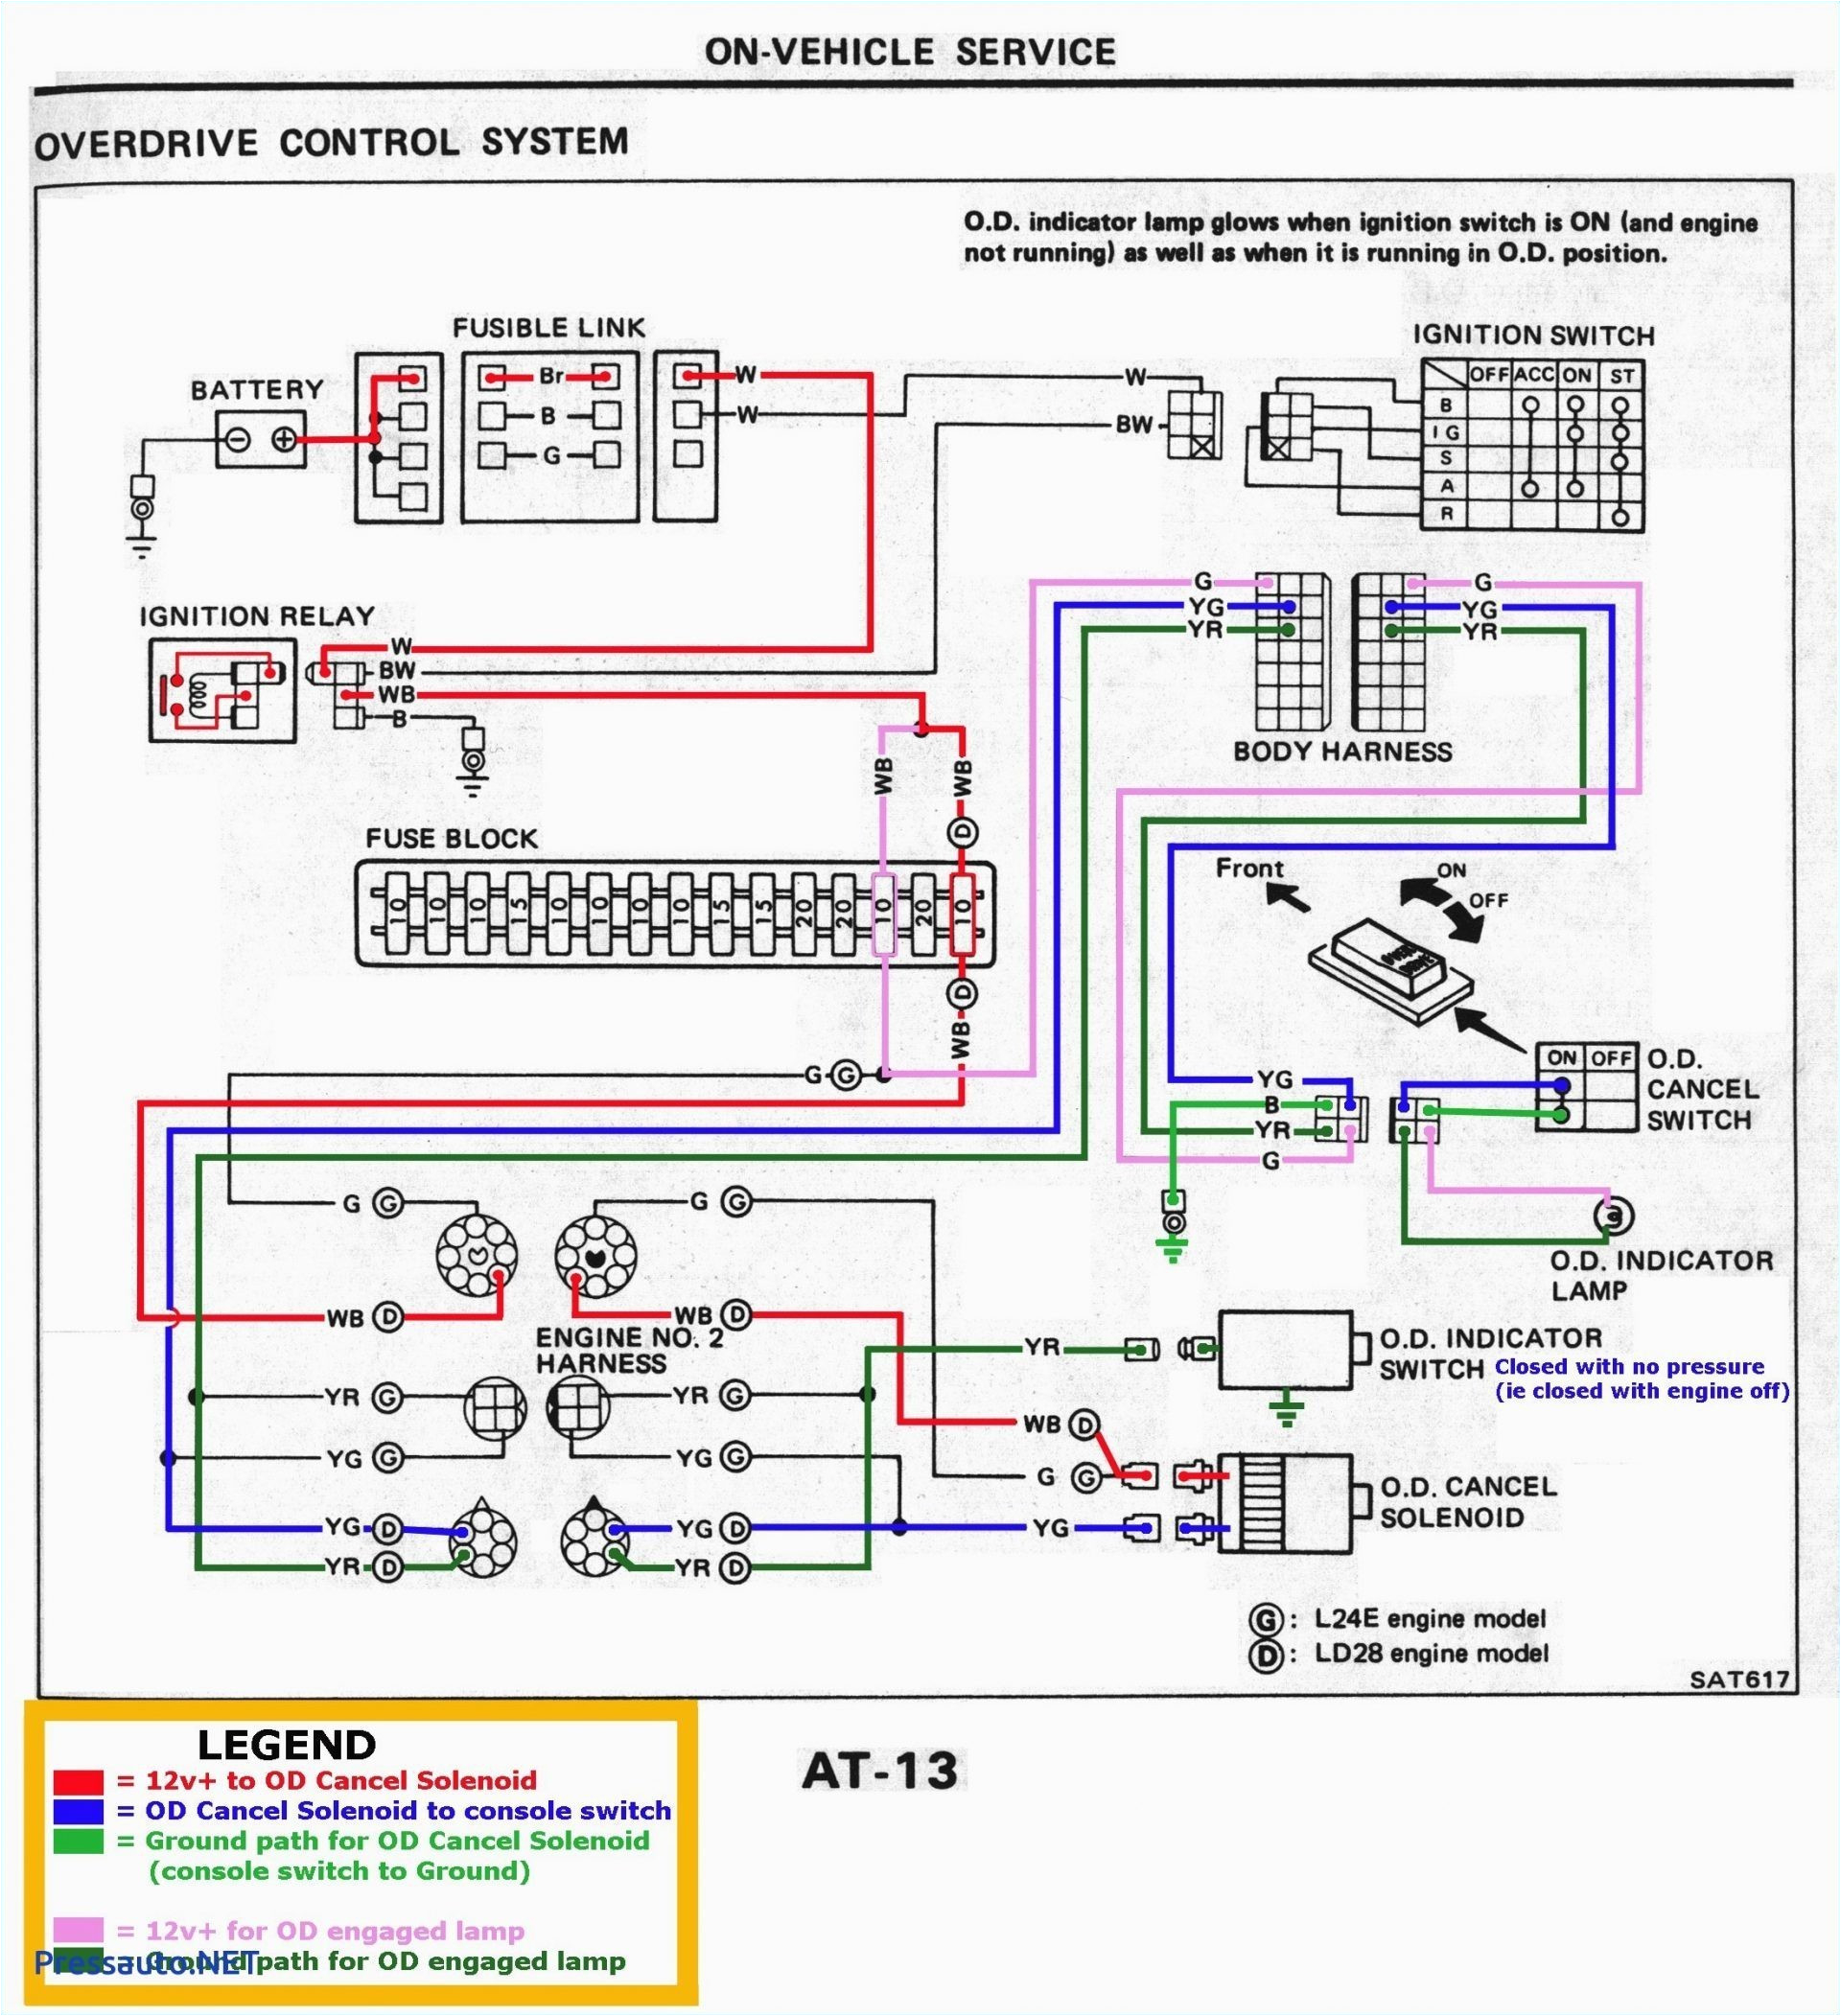 abs wiring harness diagram wiring diagrams dimensions sensor besides abs wiring harness 98 mercury free download wiring